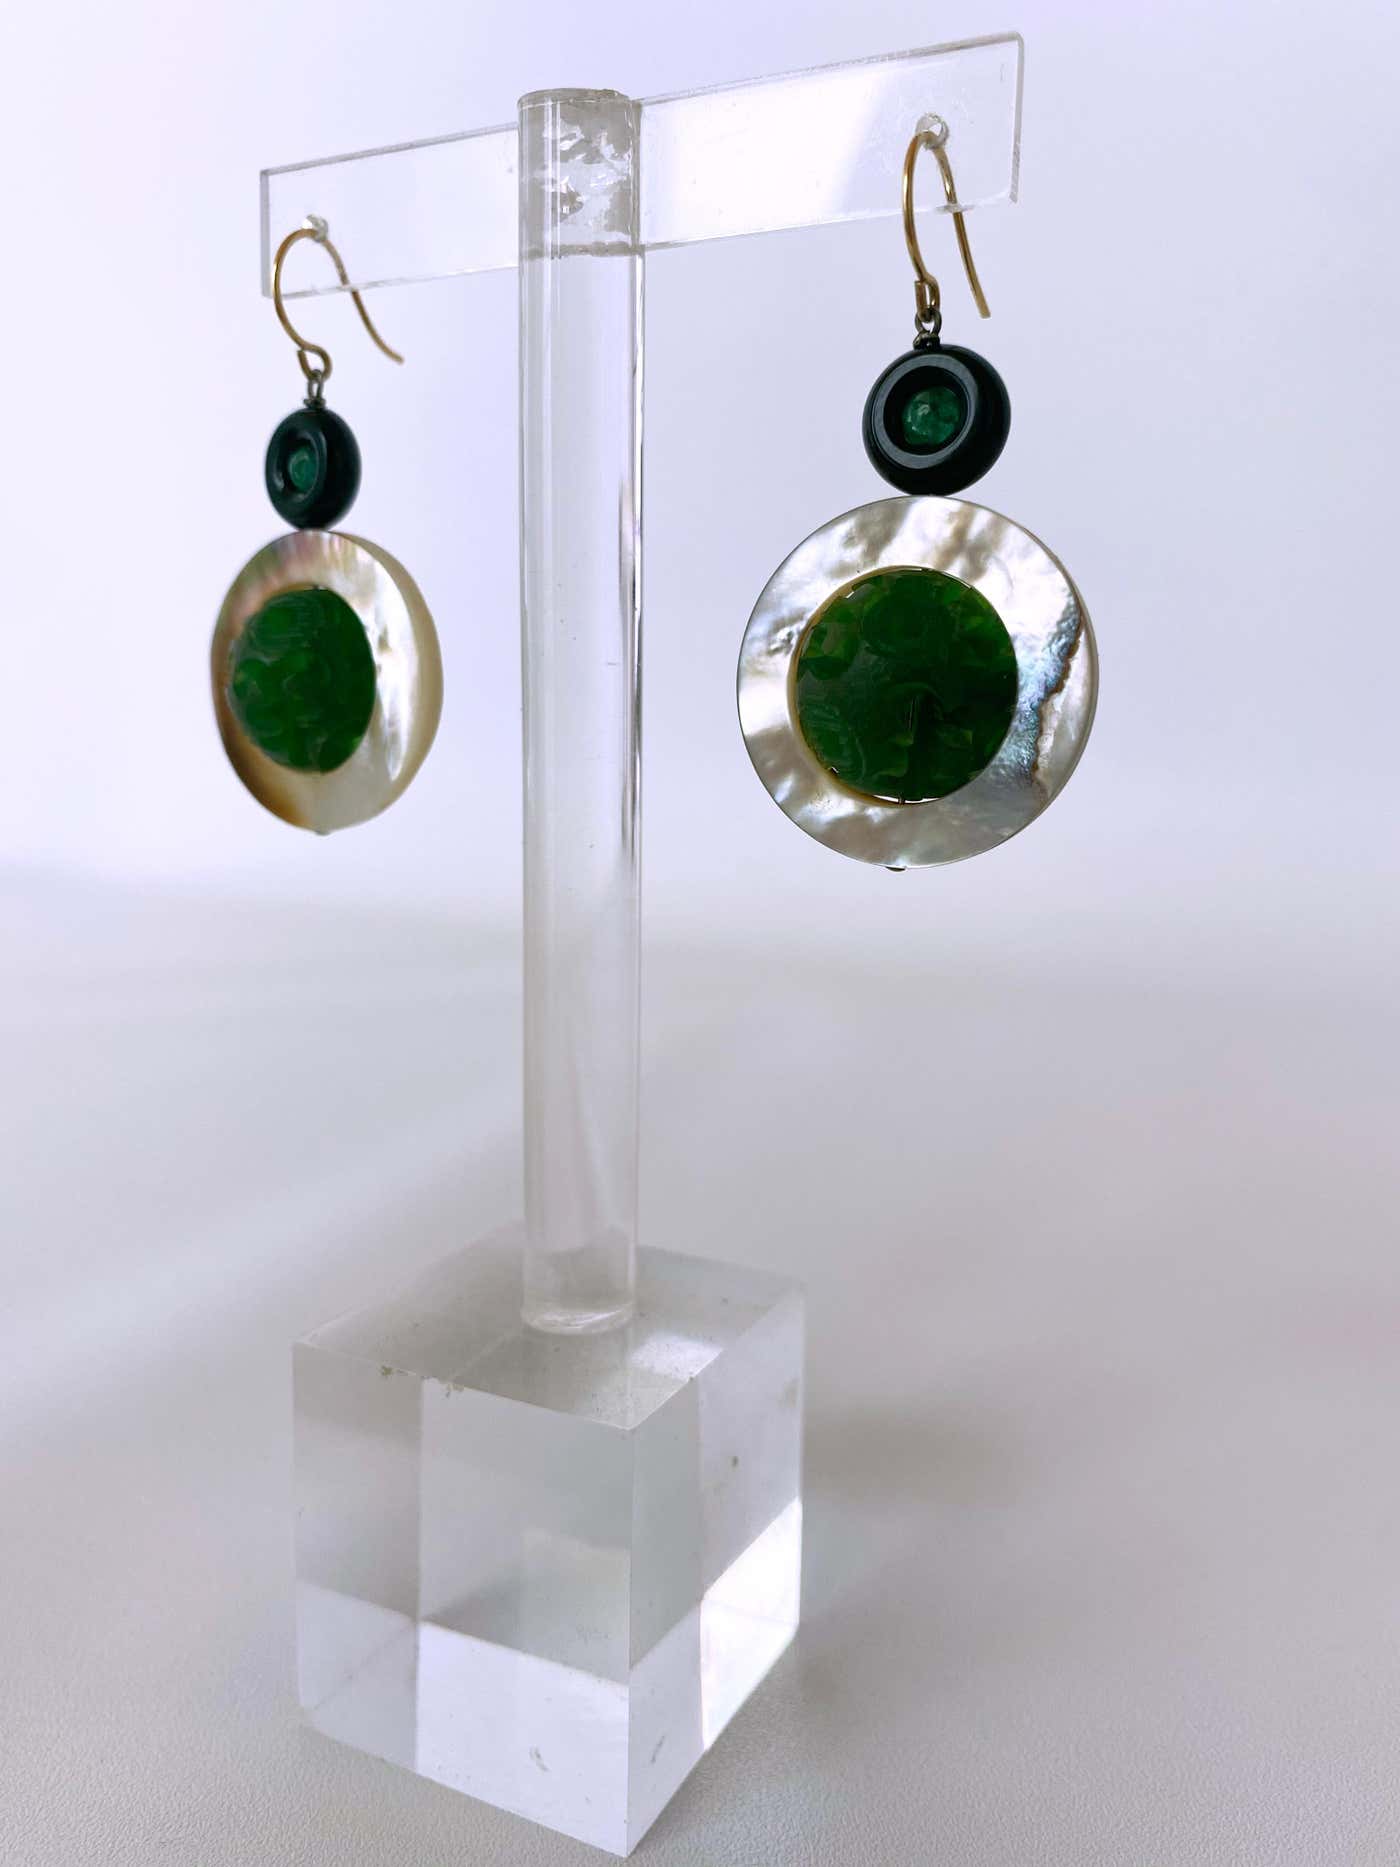 Mother of Pearl, Emerald, Onyx and Bakolite Earrings, 14k Yellow Gold